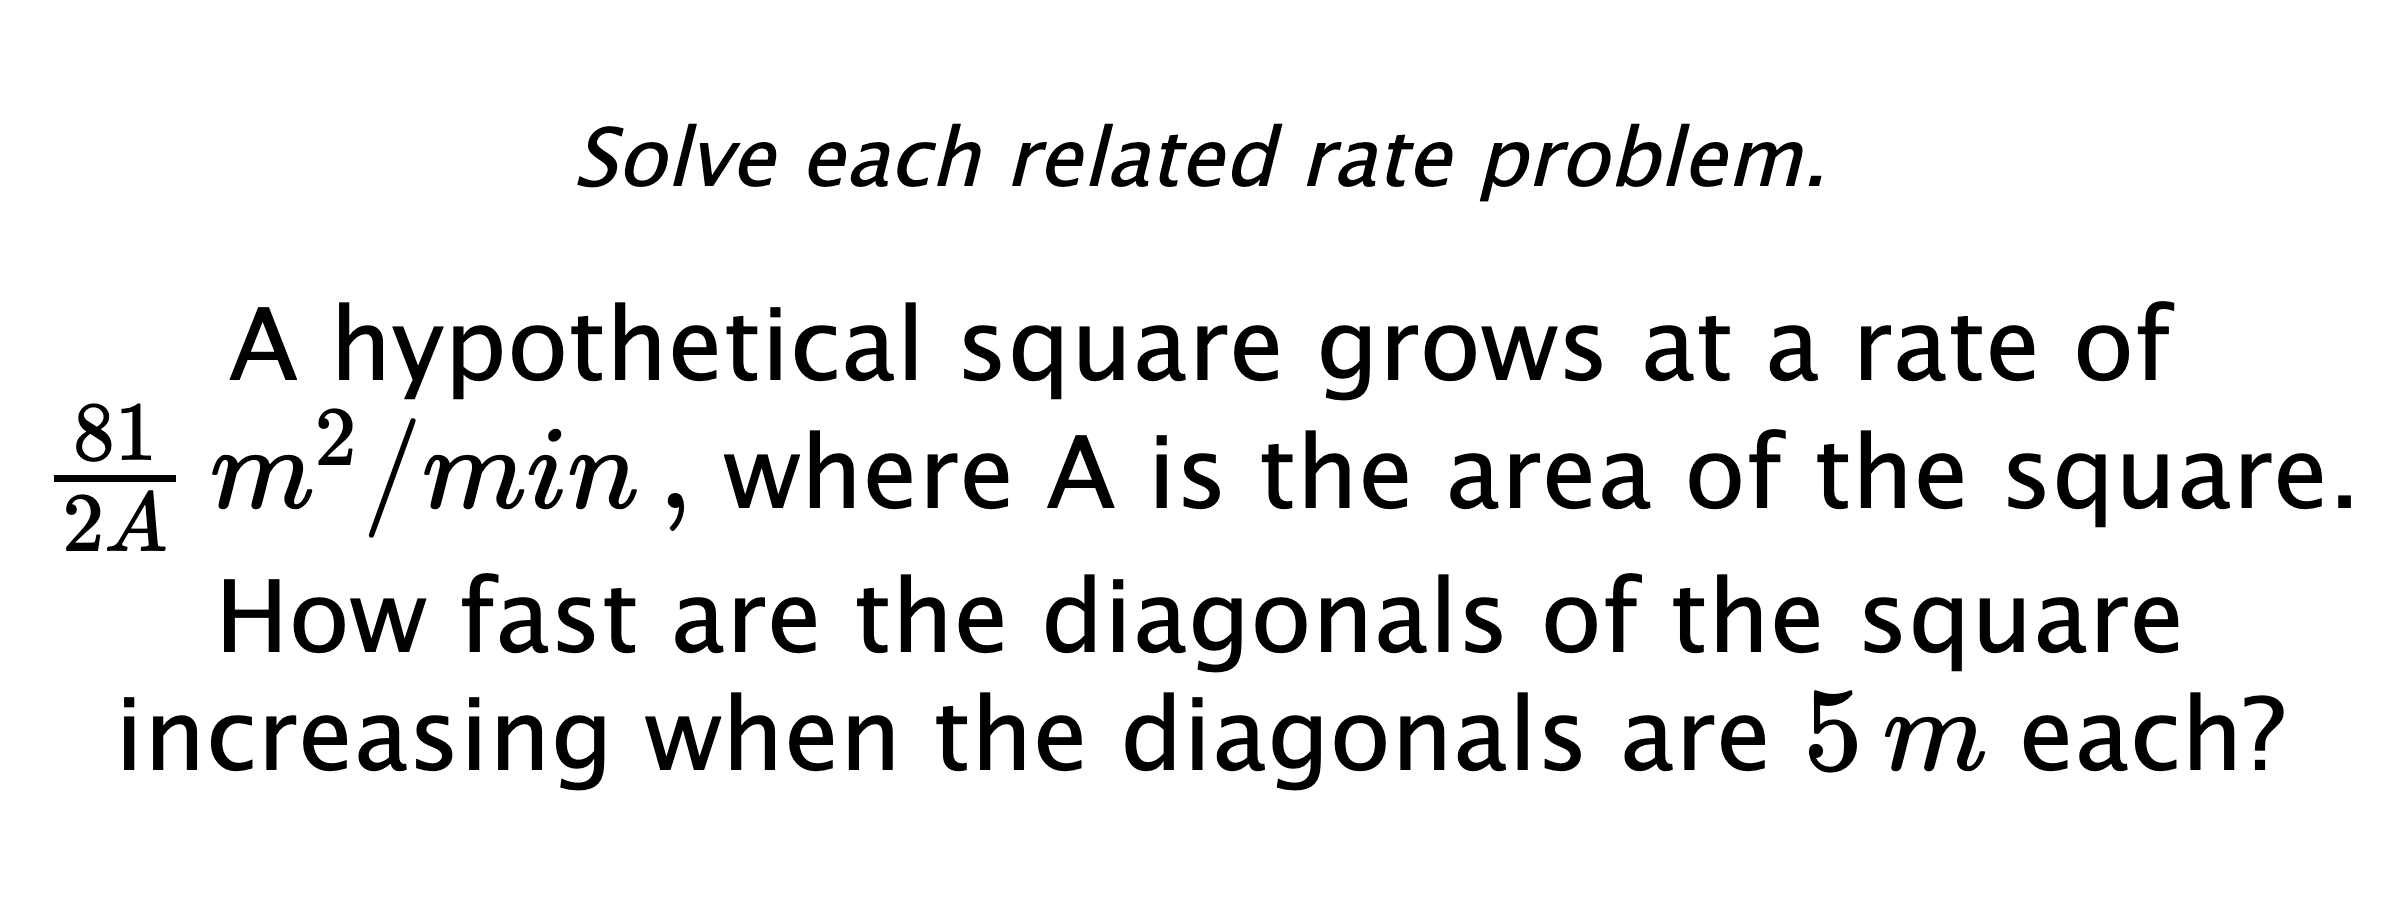 Solve each related rate problem. A hypothetical square grows at a rate of $\frac{81}{2A}\,m^{2}/min \, ,$ where A is the area of the square. How fast are the diagonals of the square increasing when the diagonals are $5\,m$ each?